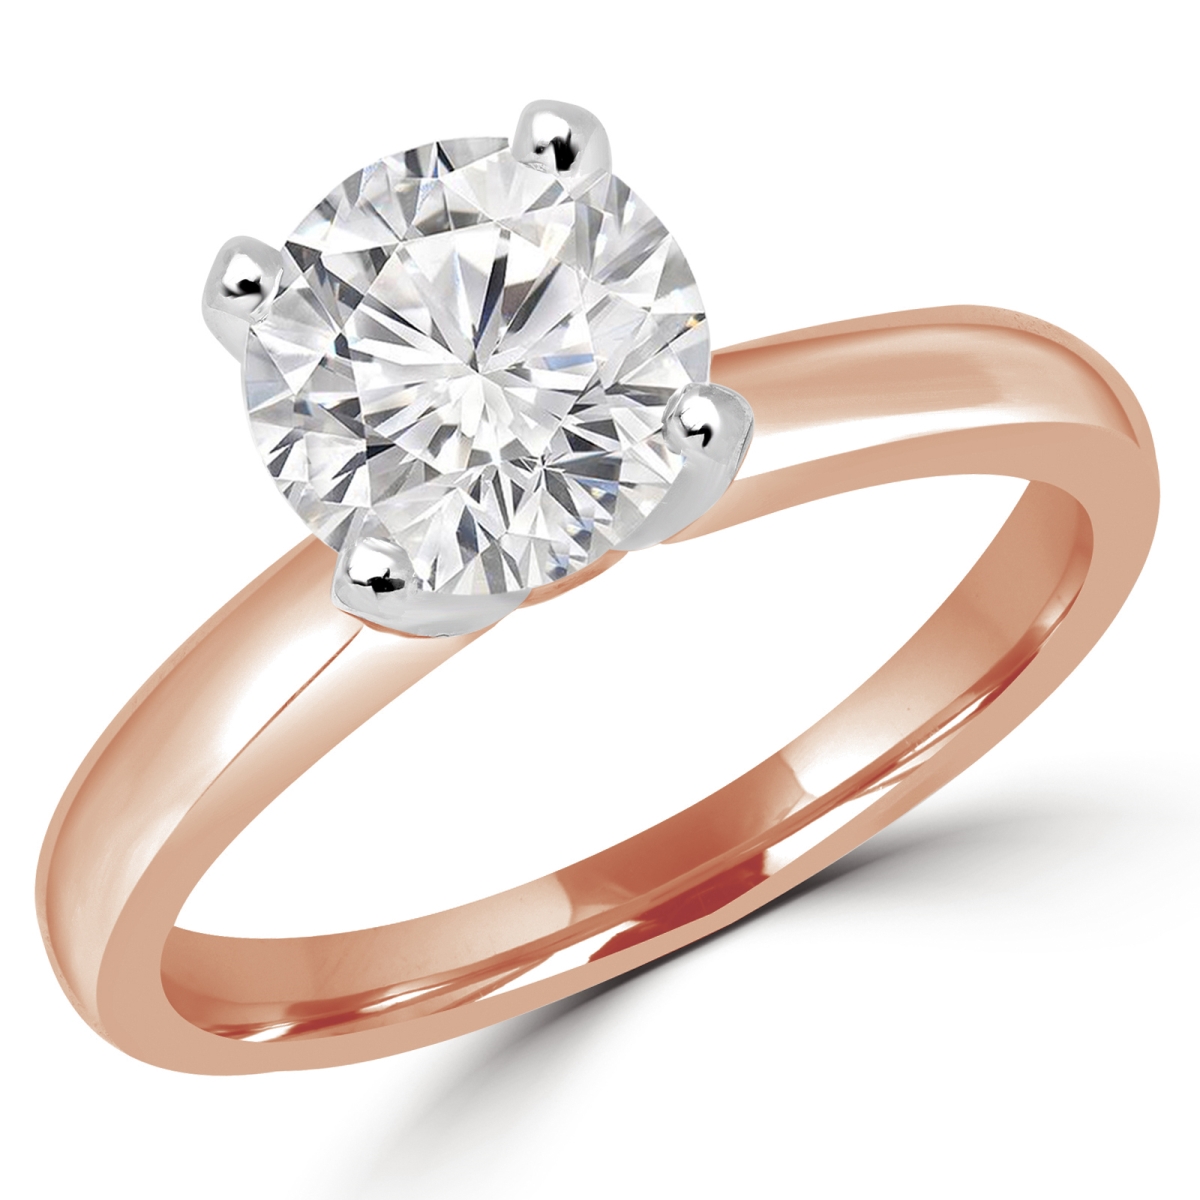 Picture of Majesty Diamonds MD180009-7.75 0.6 CT Round Diamond Solitaire Engagement Ring in 14K Rose Gold - Size 7.75